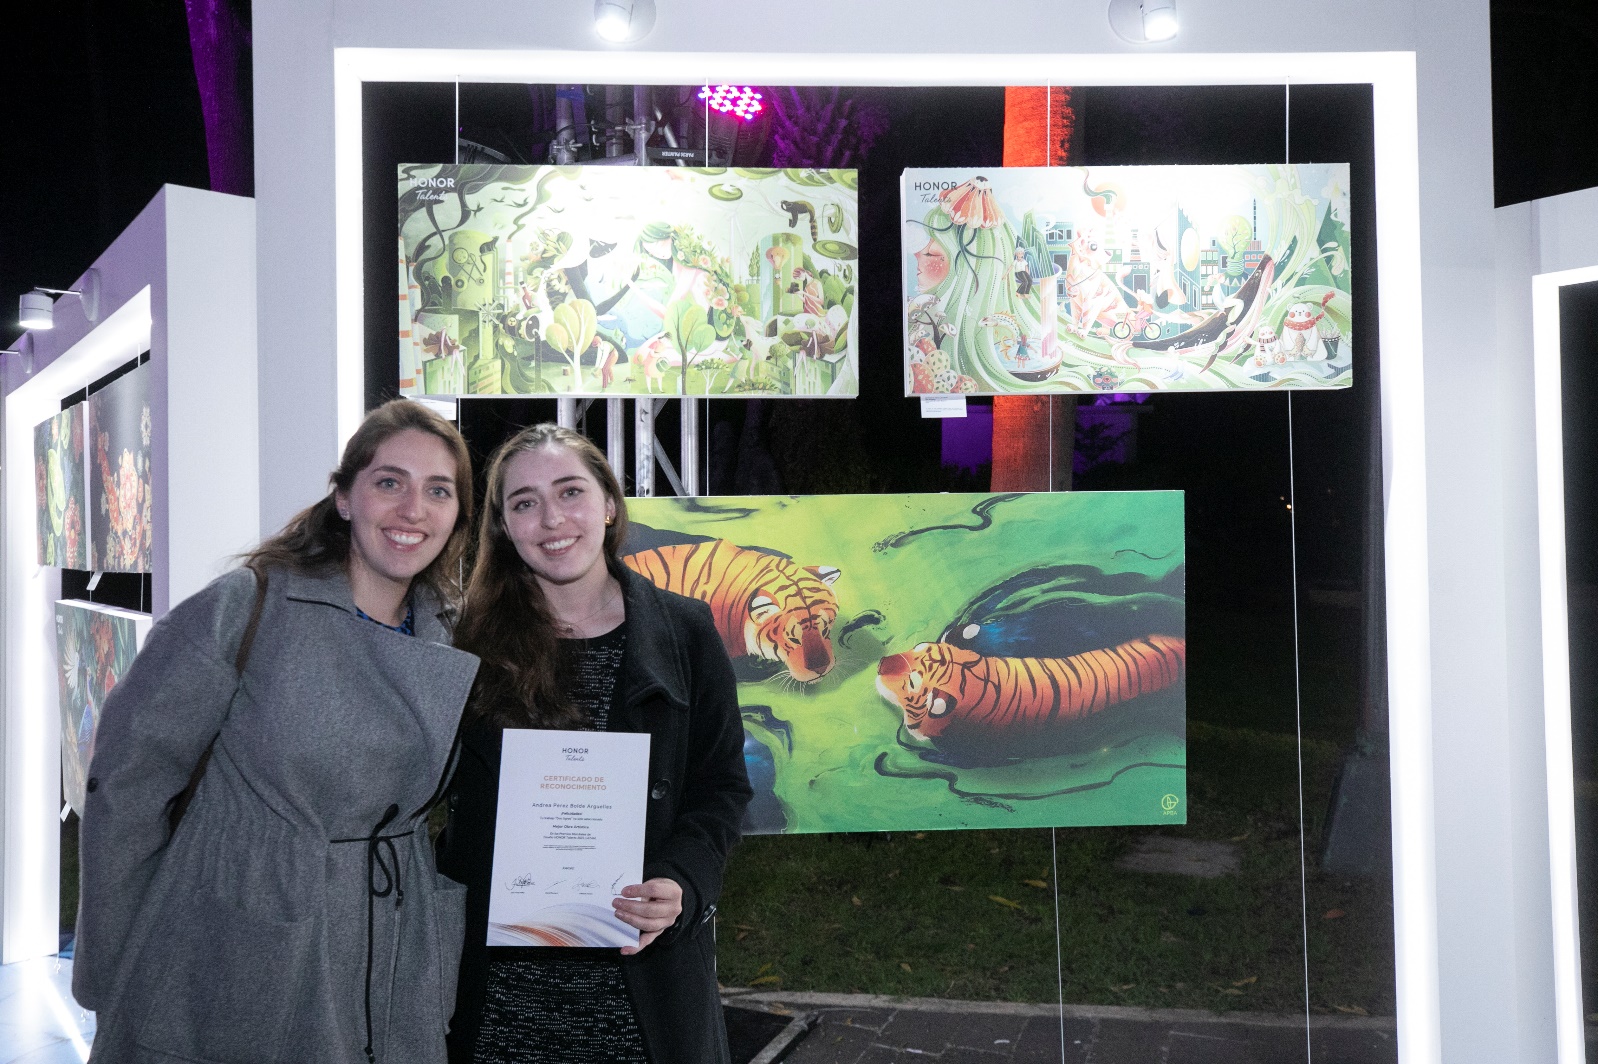 HONOR Talents annual exhibition held in the Modern Arts Museum, continues to inspire the future